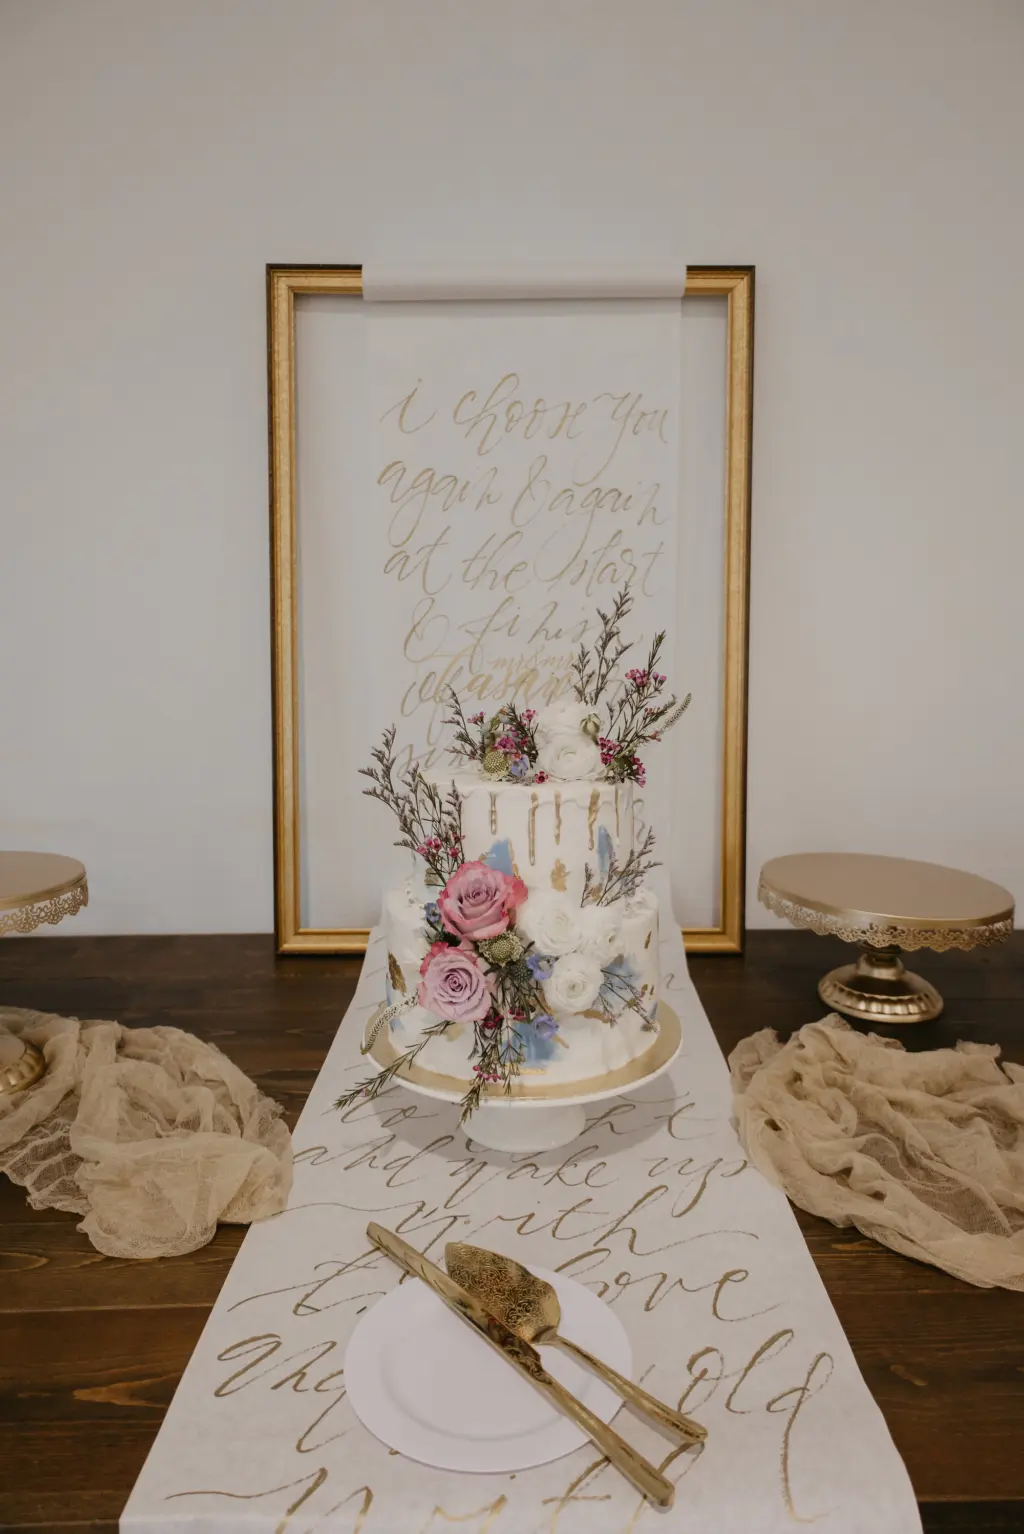 I Choose You Again and Again Calligraphy Hand-lettered Script Font Scroll Inspiration for Cake Table | Two-Tiered White Buttercream Abstract Wedding Cake with Gold Foil and Light Blue Icing, Pink and White Rose Accents